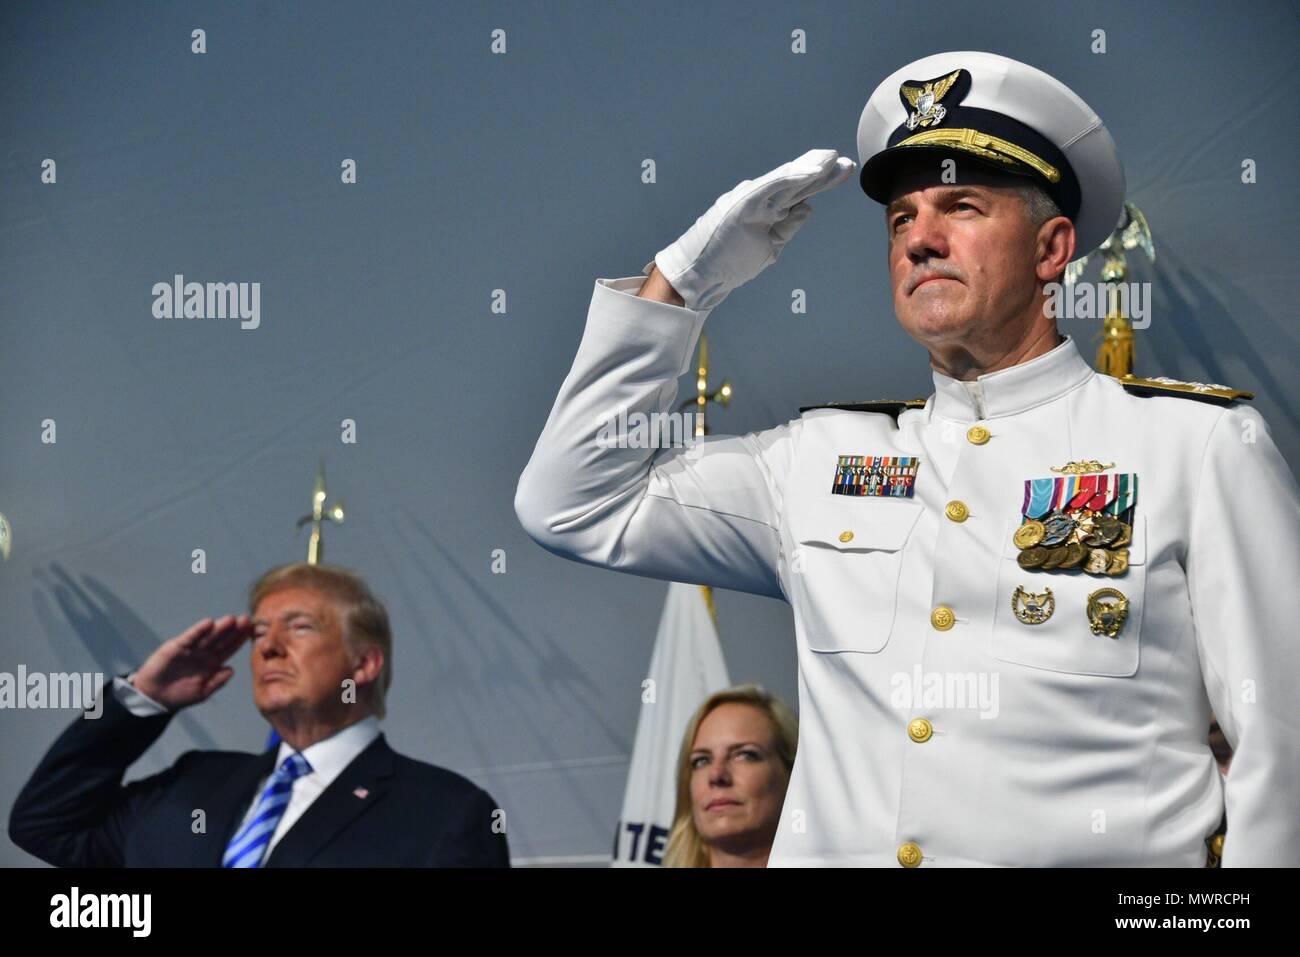 President Donald Trump, Department of Homeland Security Secretary Kirstjen Nielsen and Adm. Karl Schultz render honors during a change of command ceremony at Coast Guard Headquarters in Washington, D.C., June 1, 2018. During the ceremony Schultz relieved Adm. Paul Zukunft to become the 26th commandant of the Coast Guard. U.S. Coast Guard photo by Petty Officer 1st Class Patrick Kelley. Stock Photo